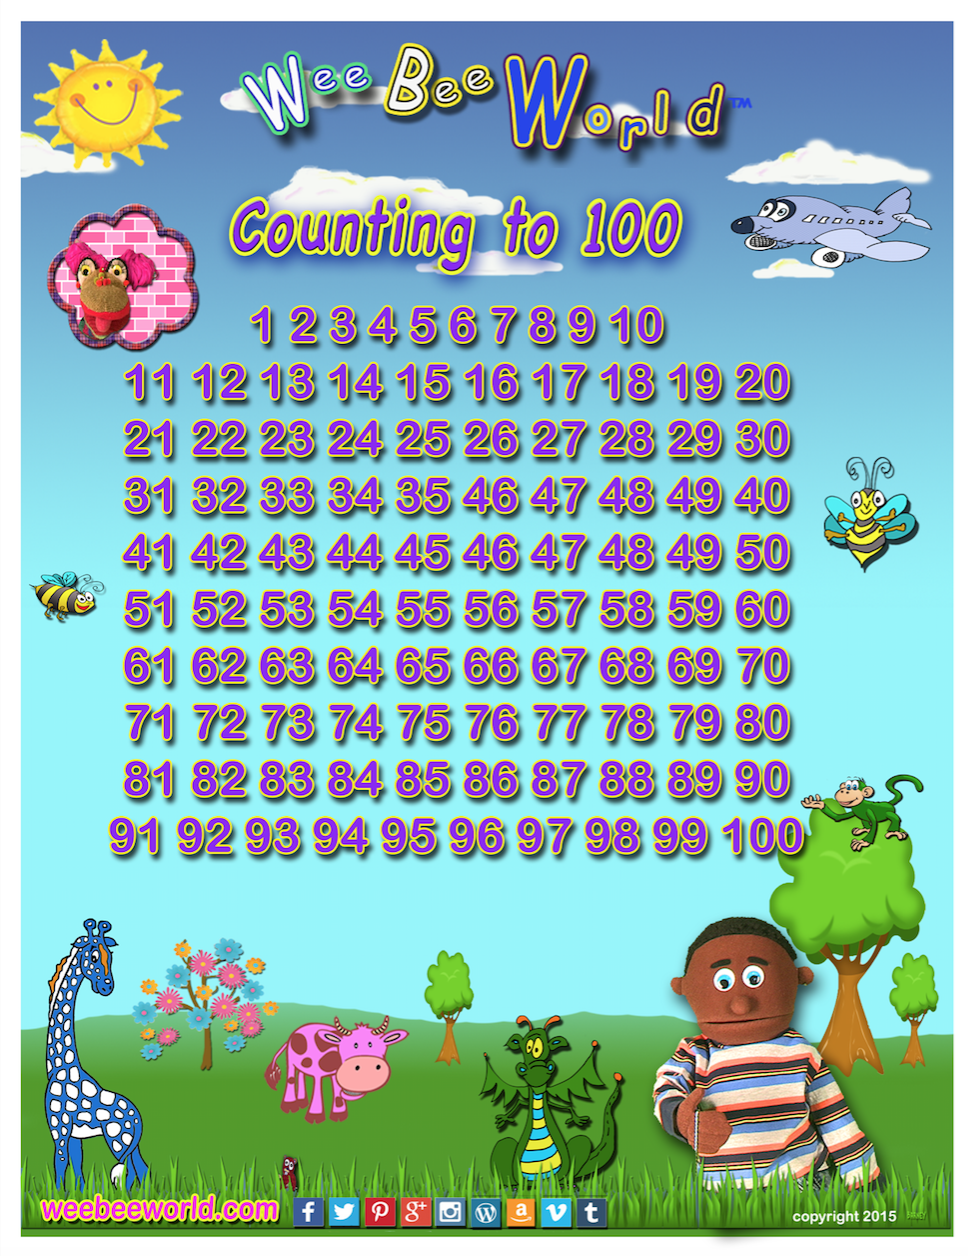 Count to 100 Mini Poster